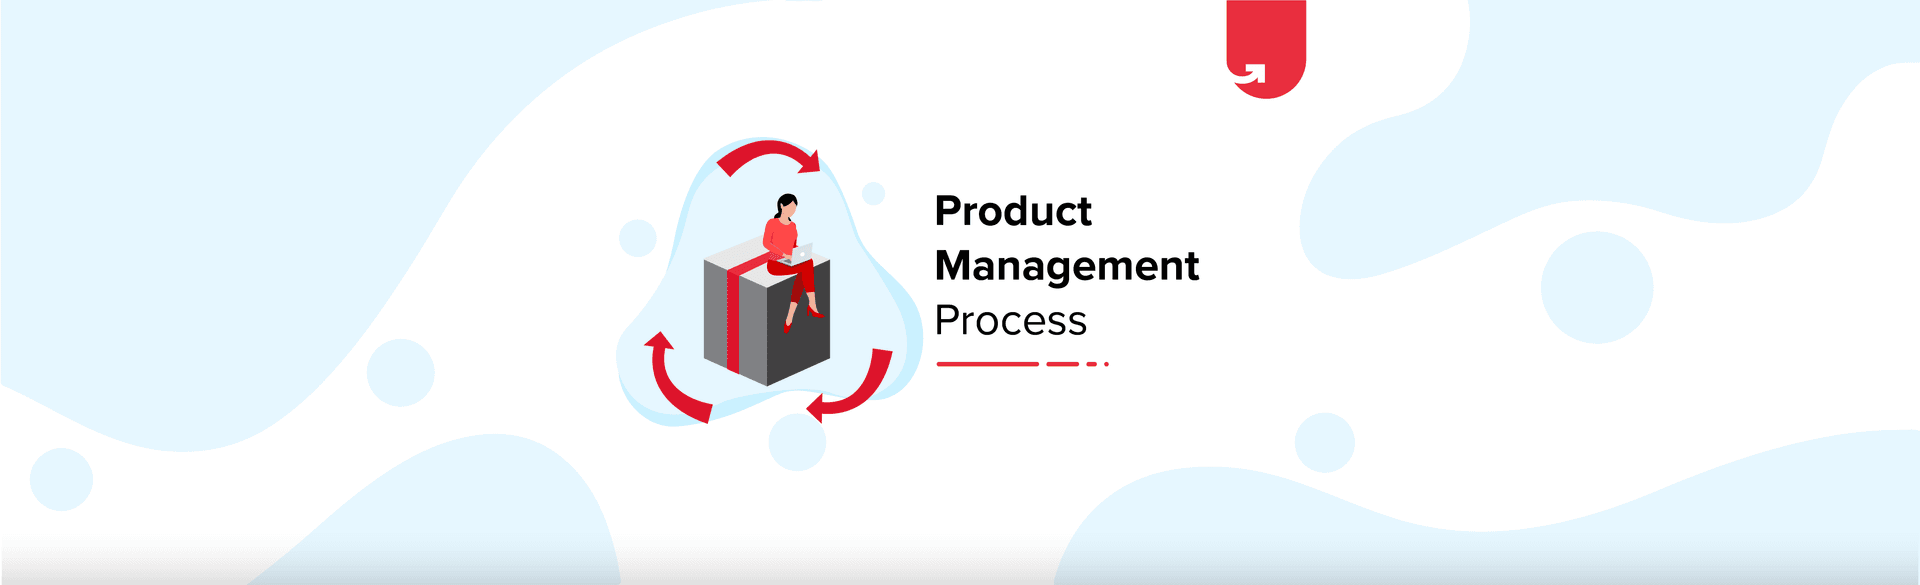 Product Management Process: 6 Steps To Bring Your Next Best Product